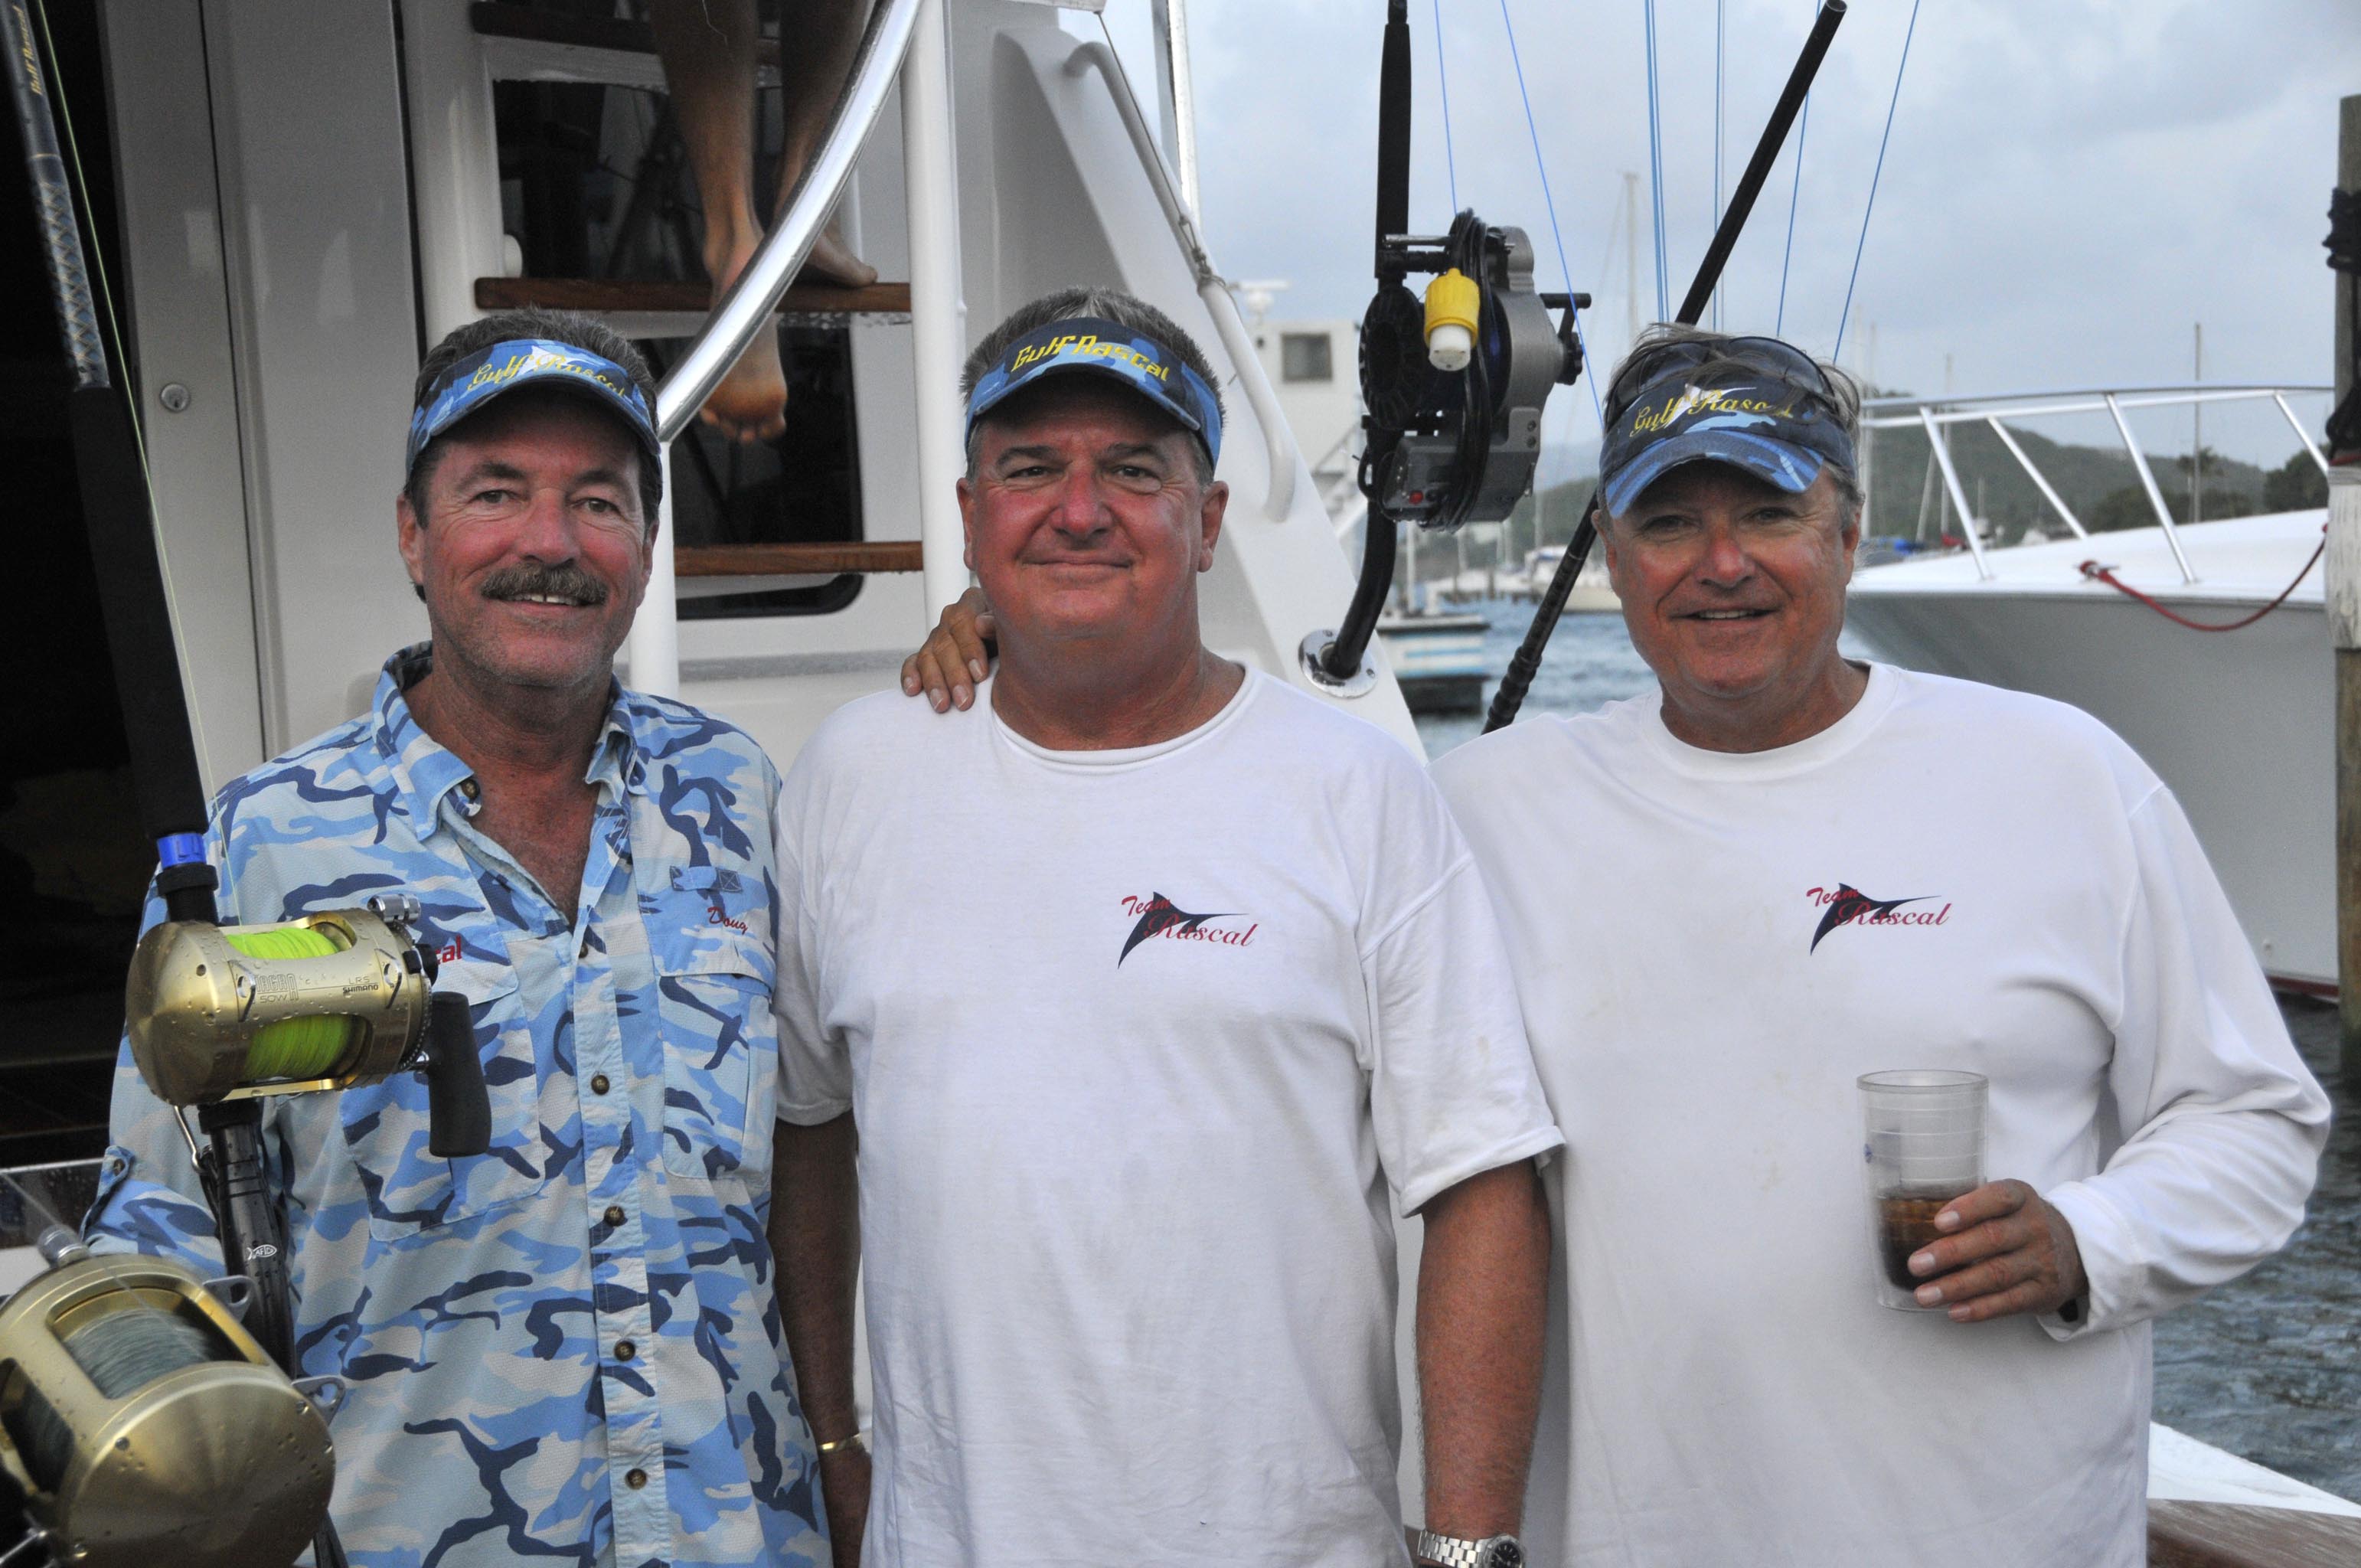  Gulf Rascal’s trio of anglers – Doug Caddell, Philip Napier, Rod Windley – released nine blue marlin total for the tournament and moved the boat into third place in the boat standings. Credit: Dean Barnes